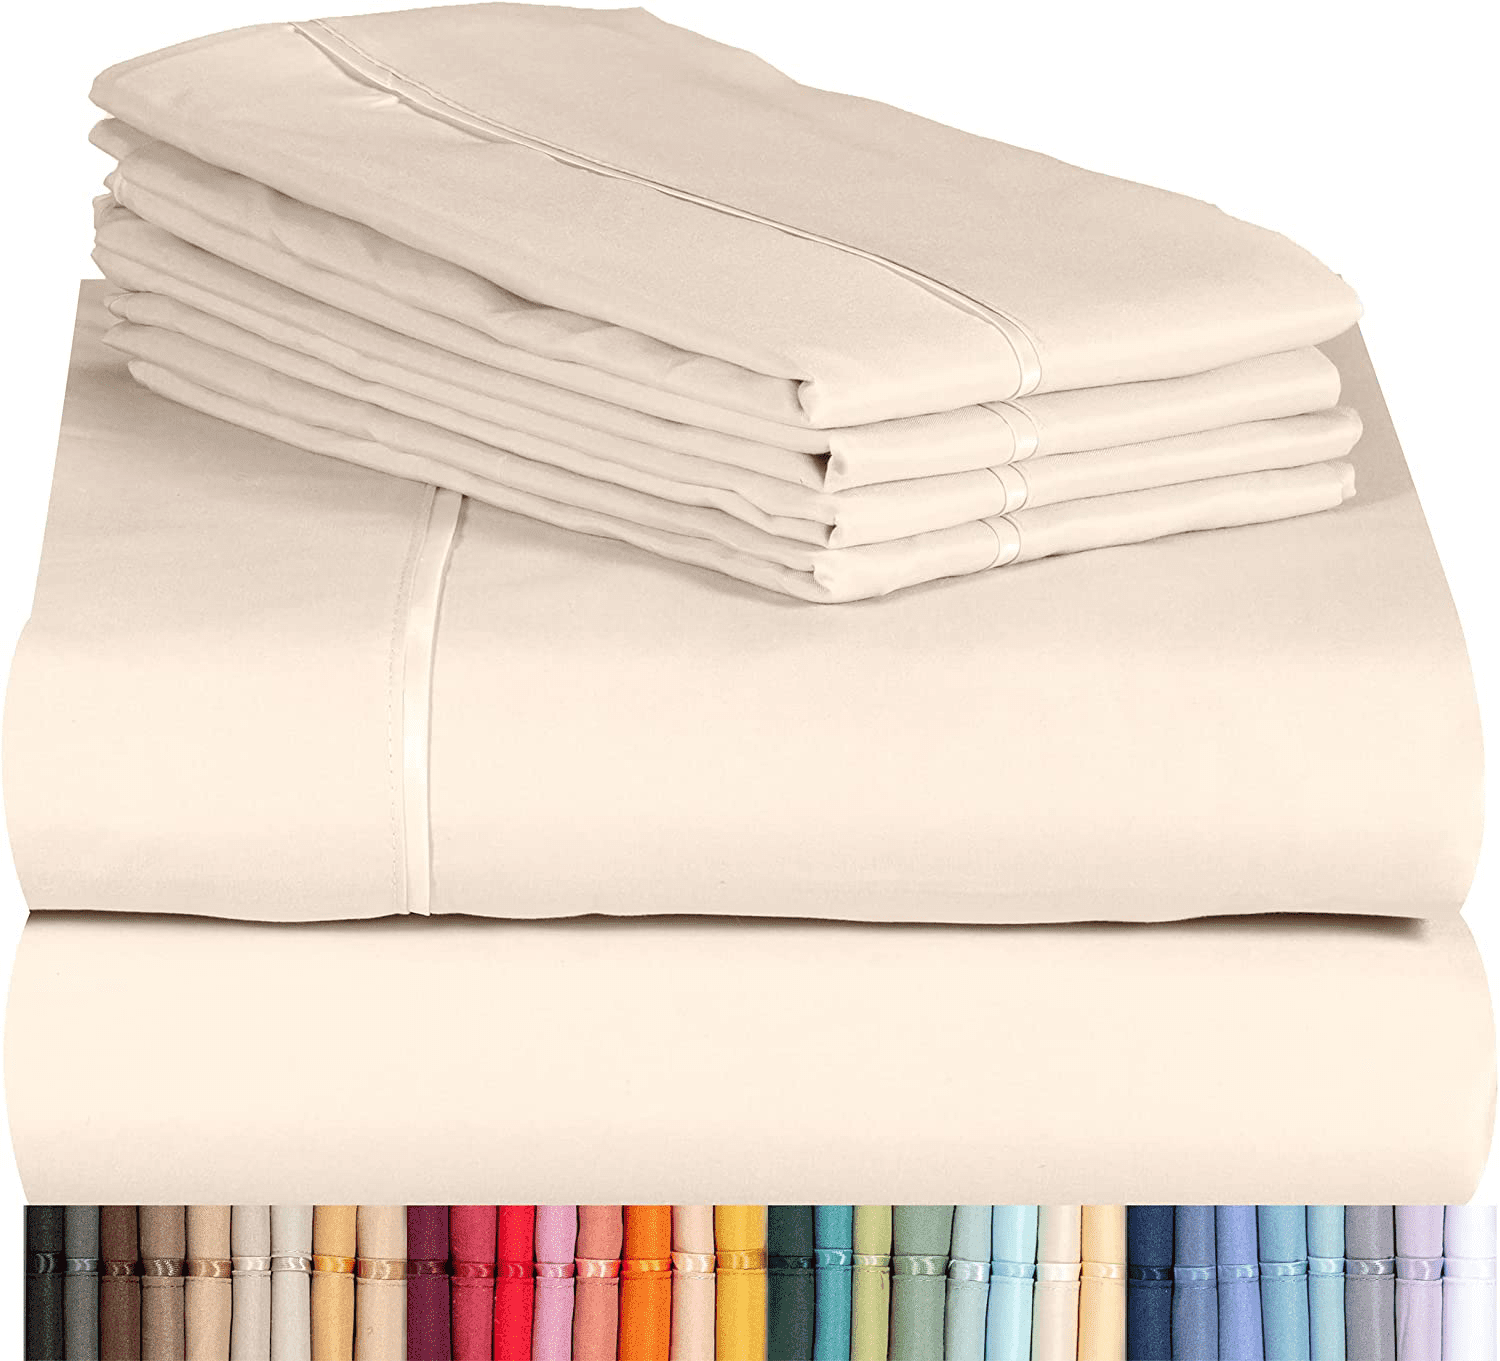 1 new premium queen size white fitted sheet 180tc percale 60 x 80x12 deep pocket 